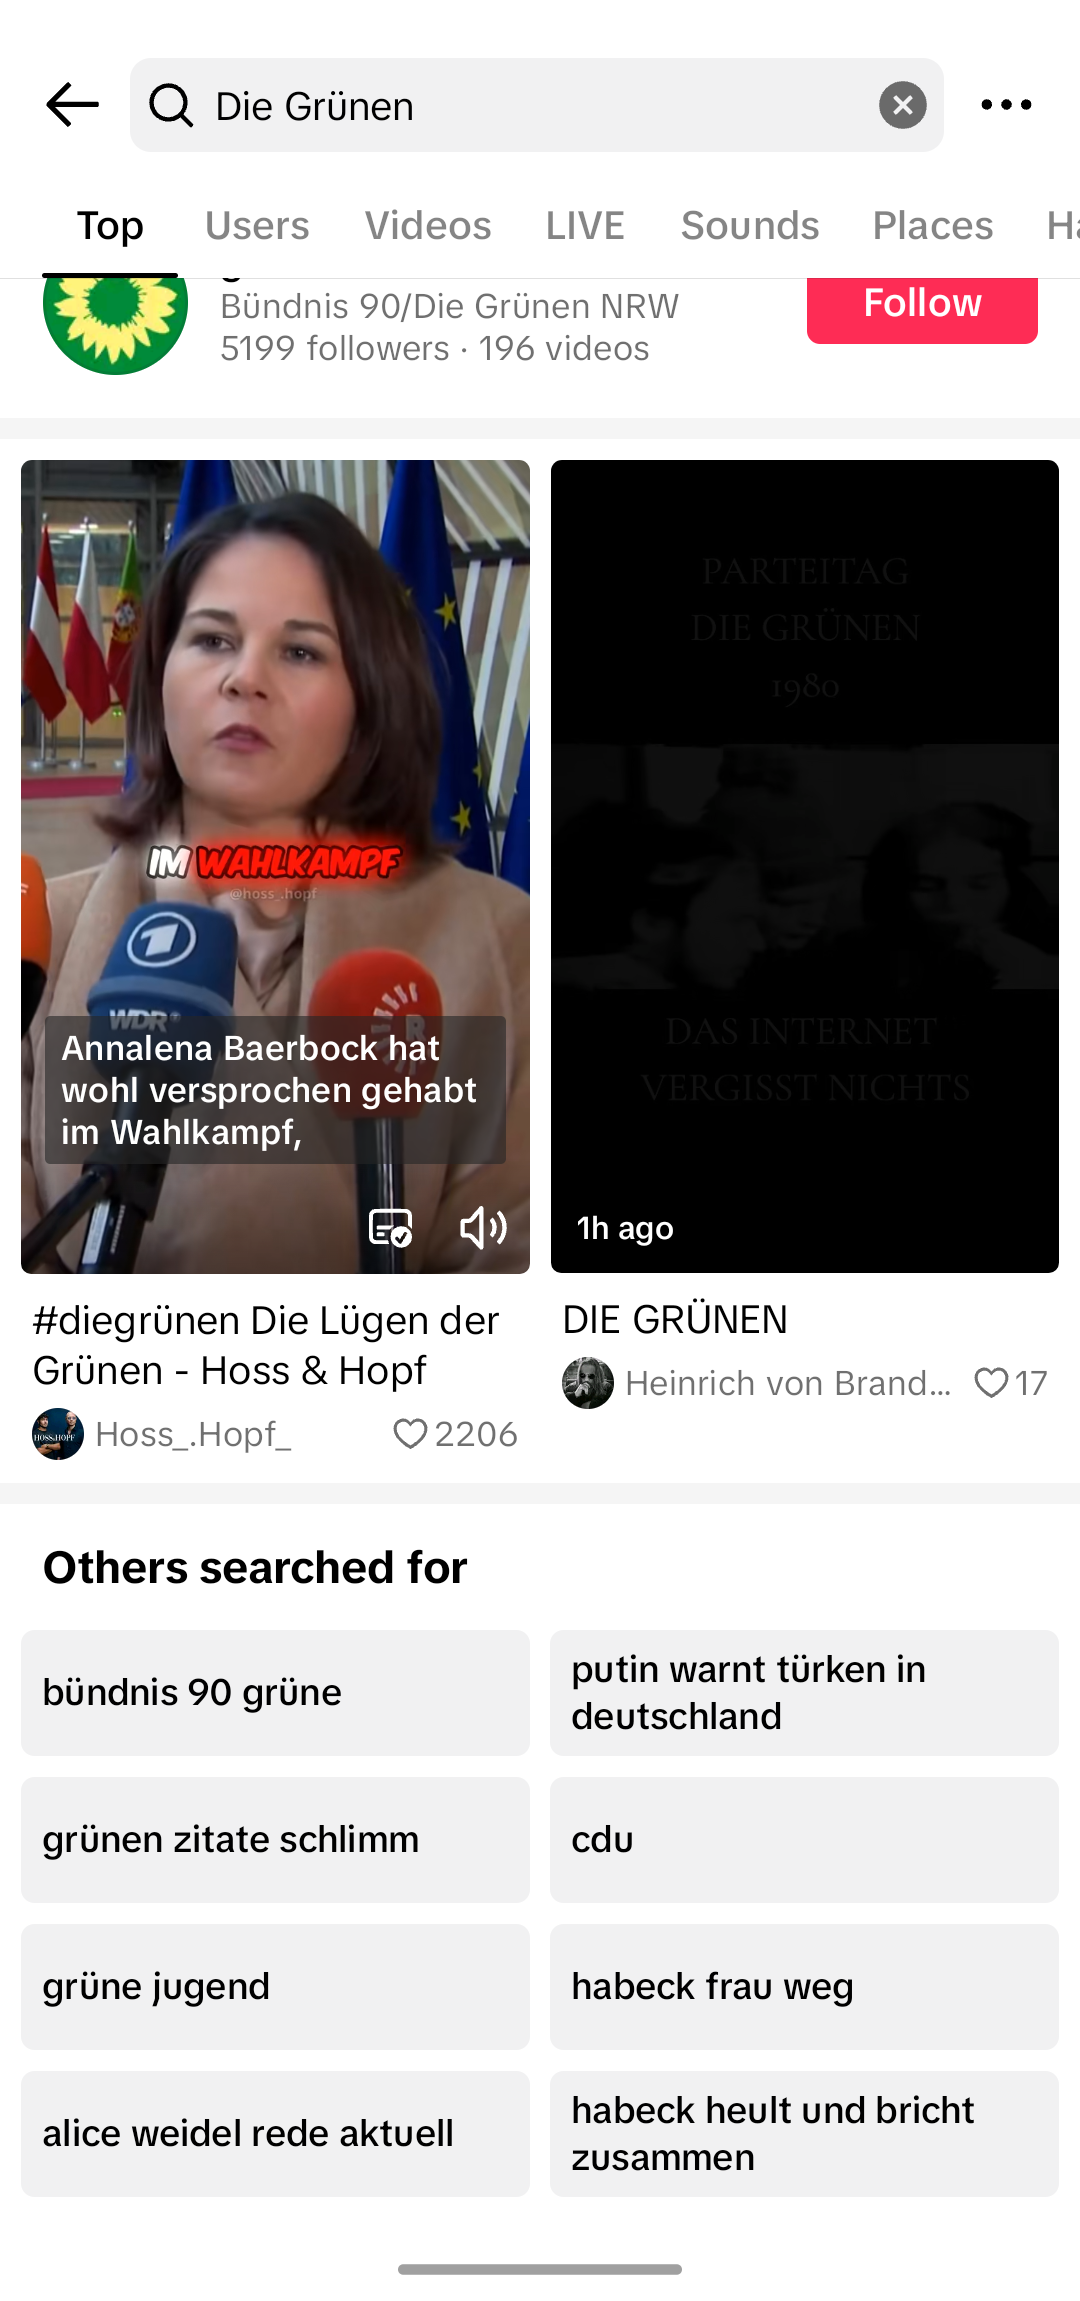 Screenshot from TikTok showing search suggestion for 'The Greens' in July 2023. Suggestions include 'putin wars turkish people in Germany', 'cdu' and 'habeck wife left'